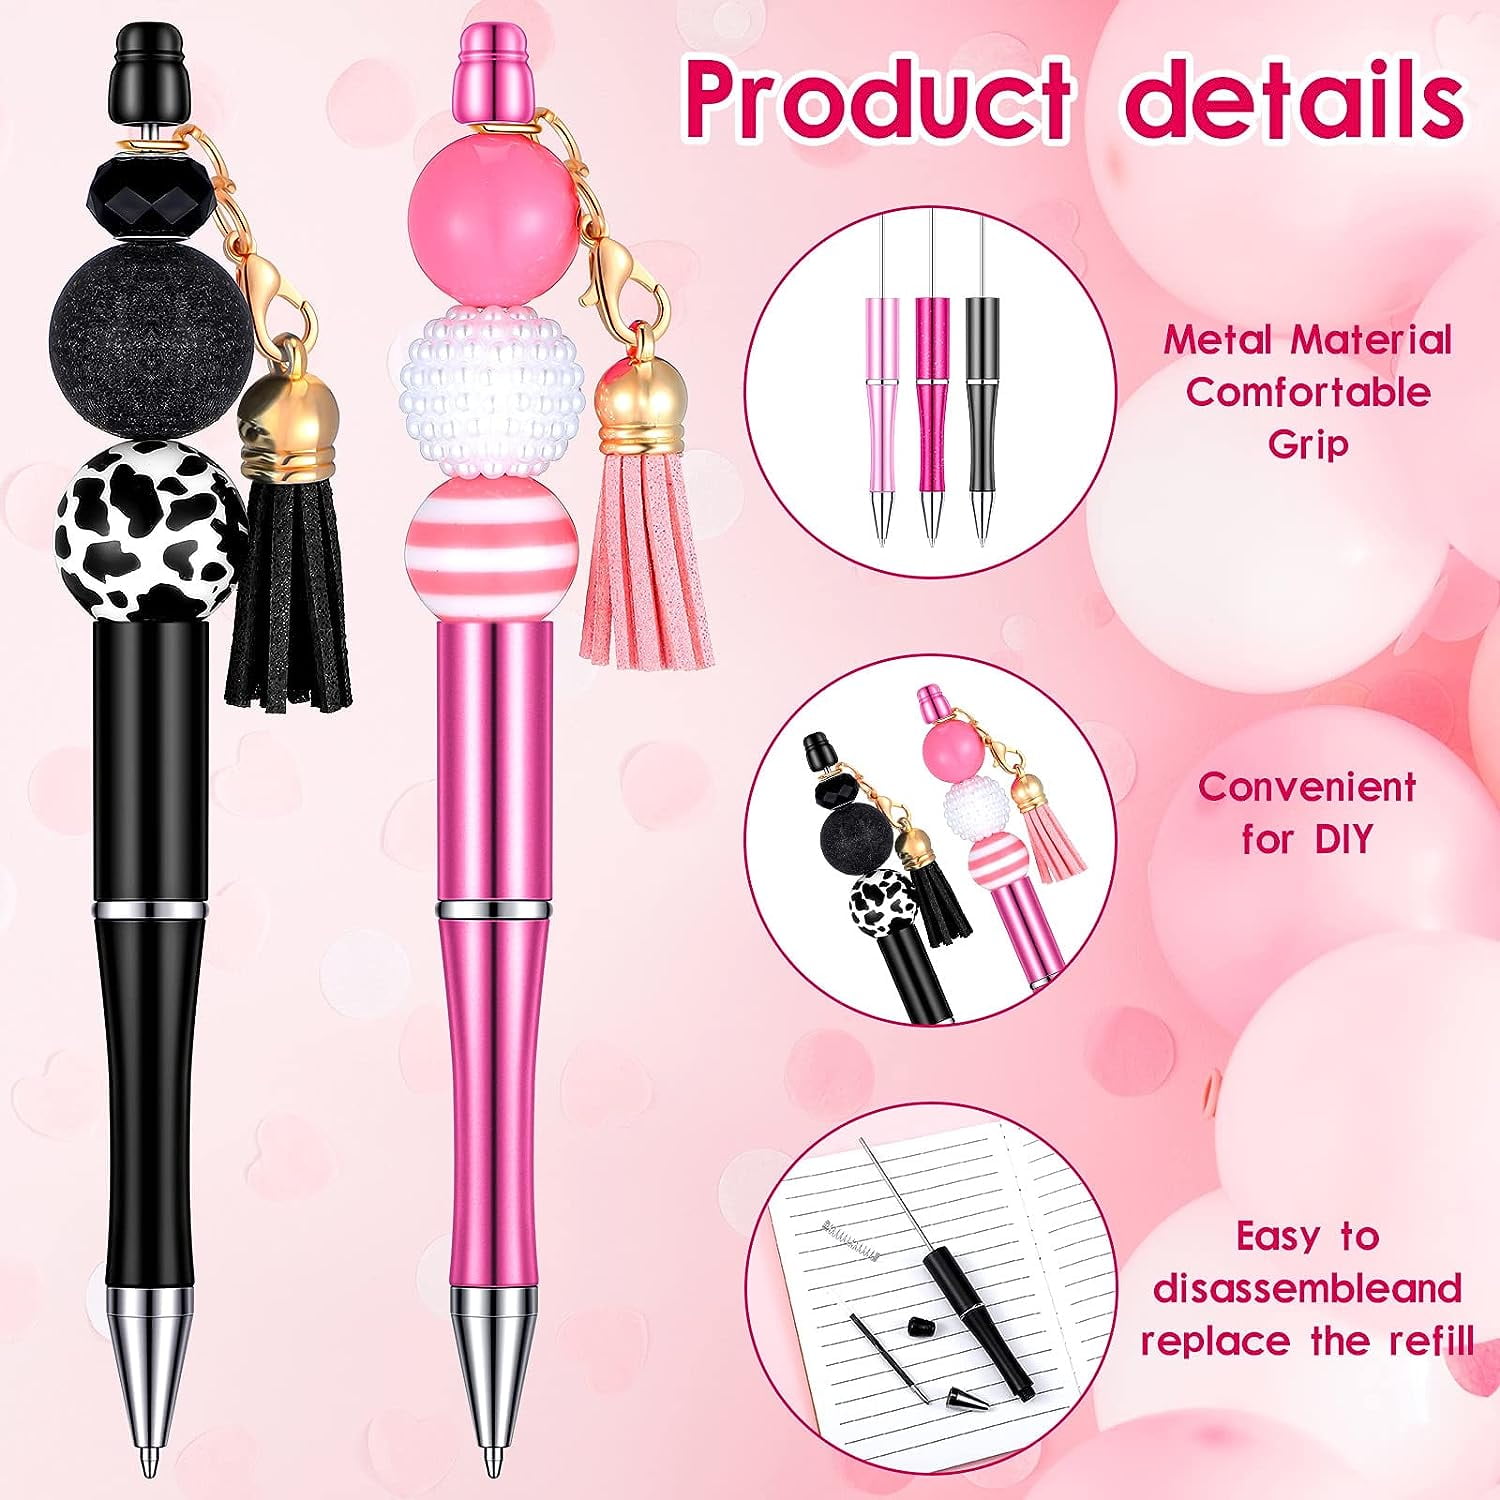 Wholesale Metal Beadable Pen Creative DIY Beads Ballpoint With Shaft Black  Ink Stationery School Office Supplies Kids Gift From Xiguabc56, $12.32